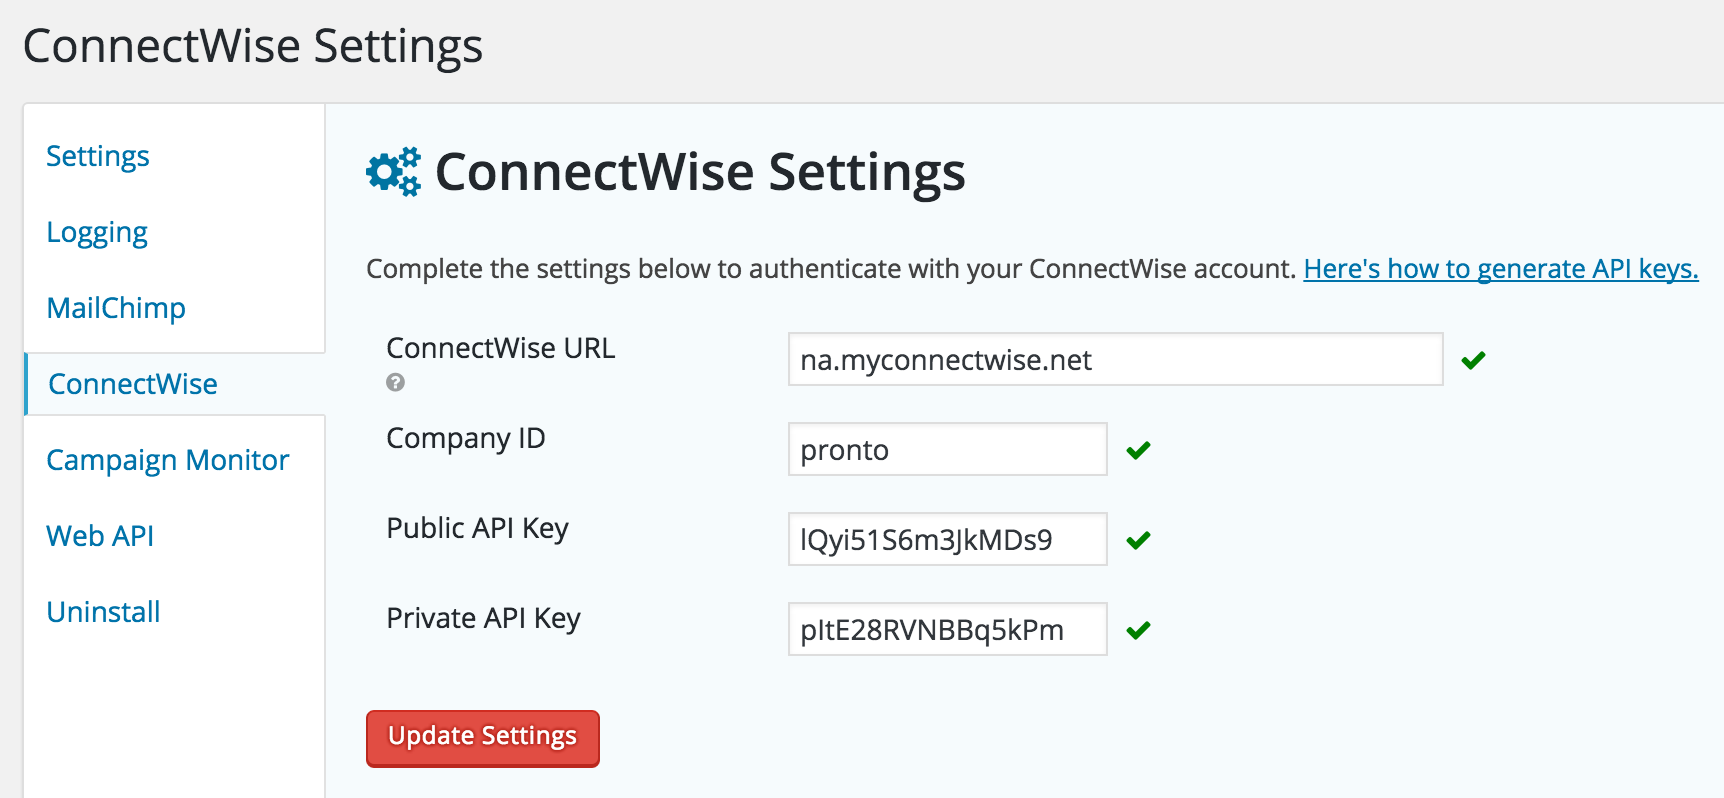 Enter your account’s credentials to authenticate. When successful you’ll see green checkmarks.